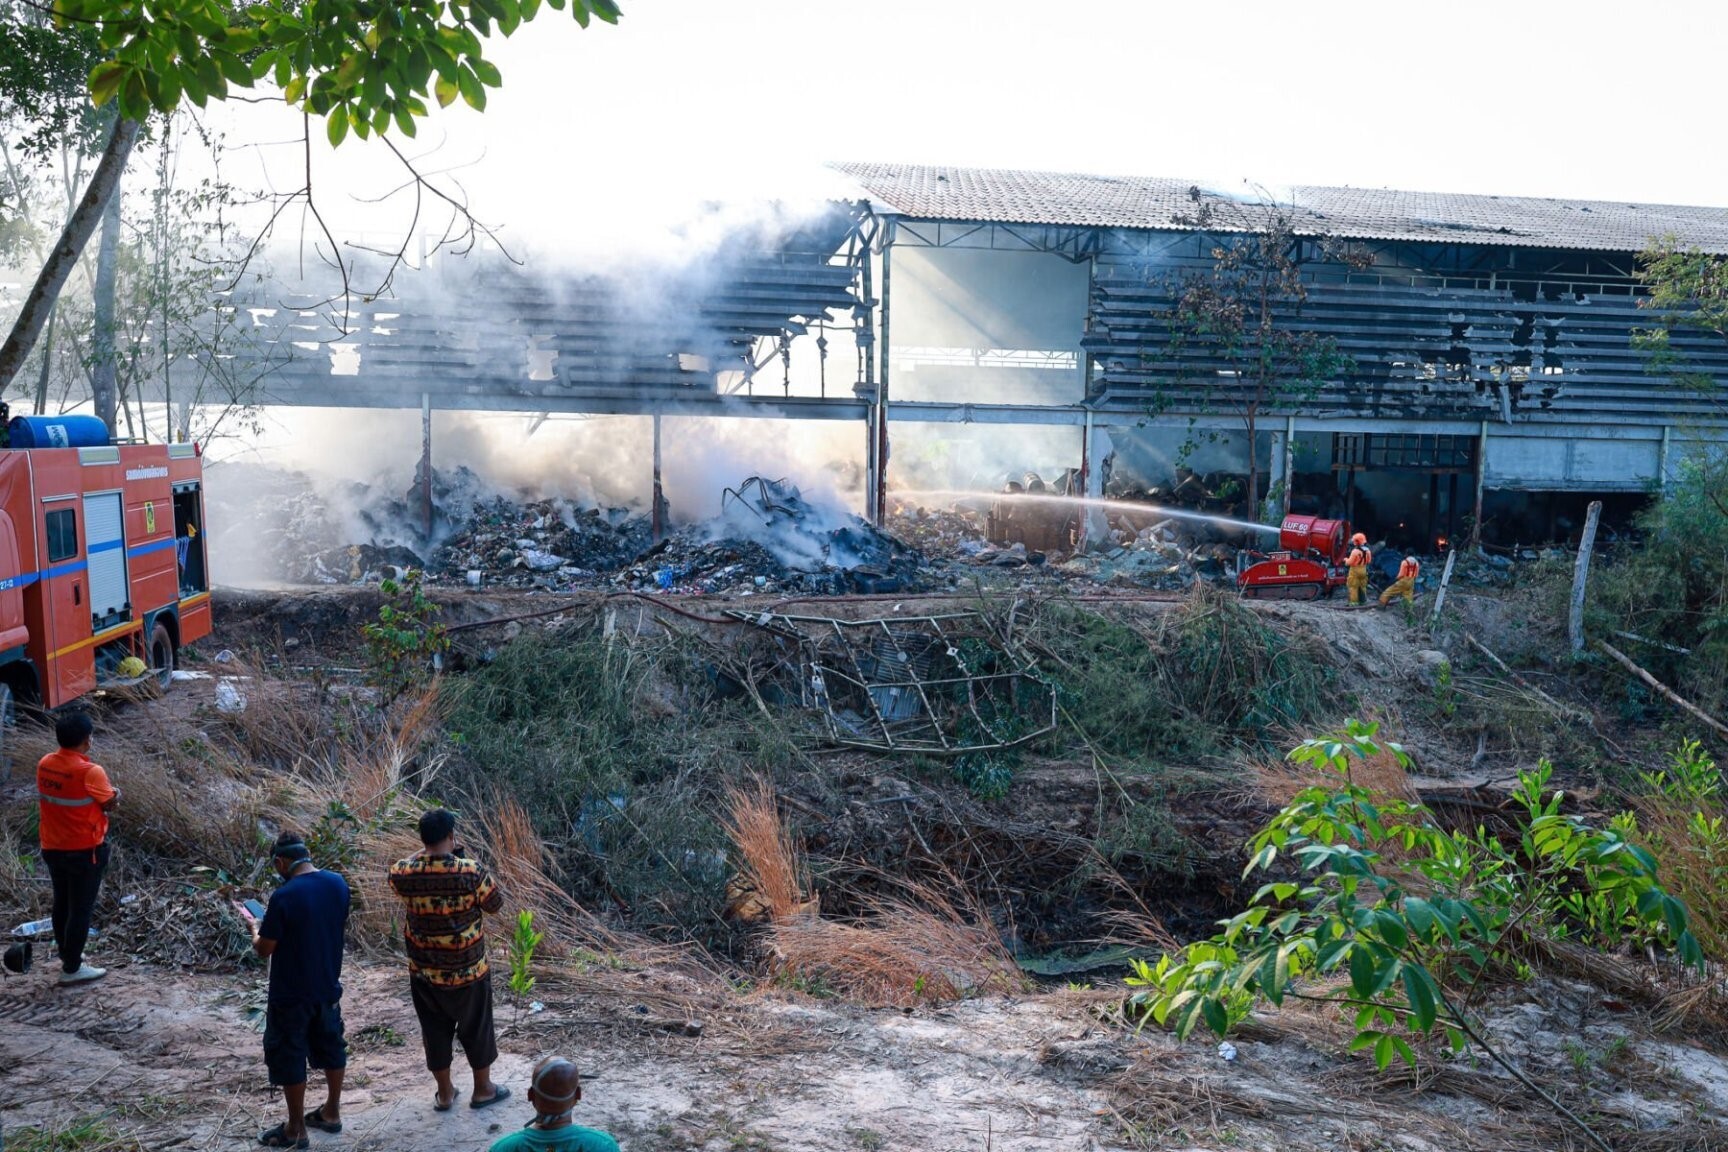 Transfer of aluminium dross from fire-hit Rayong plant disrupted by local protest